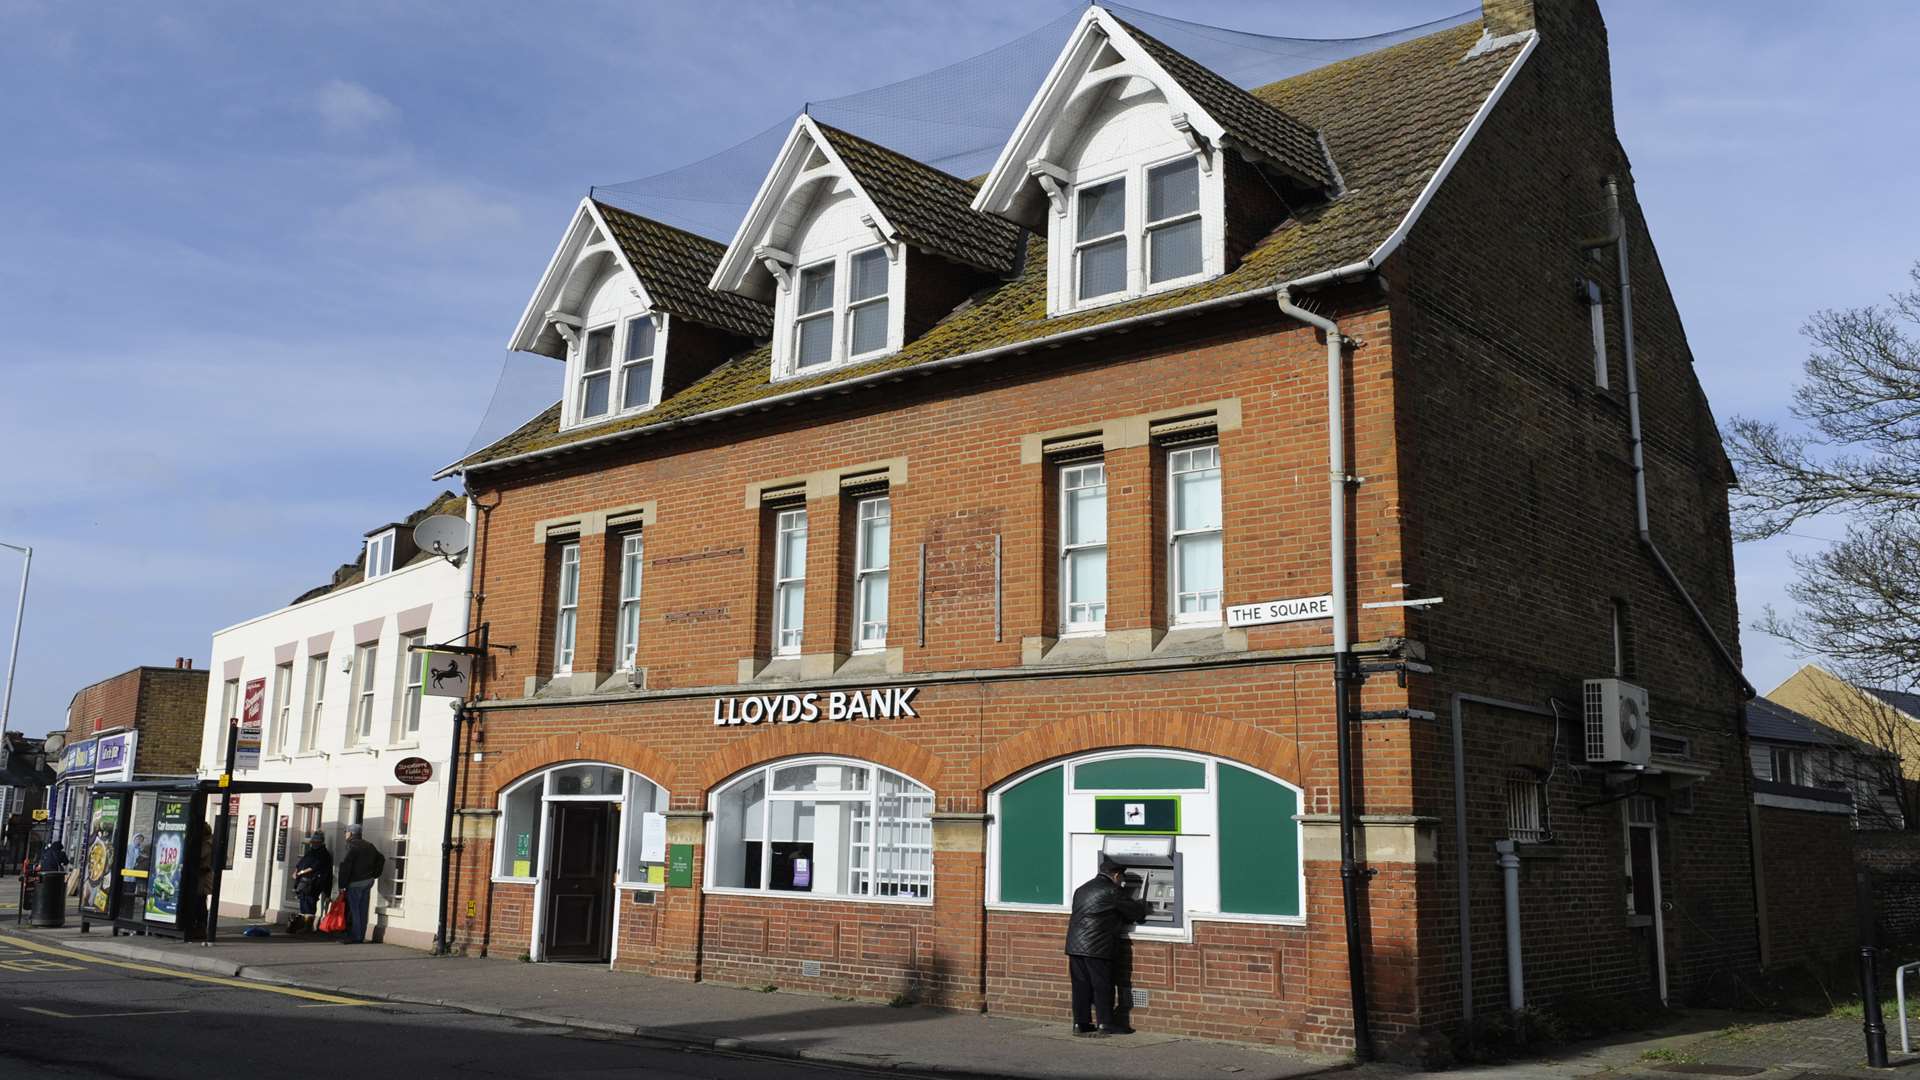 Banks in Birchington are closing down including Lloyds, The Square.